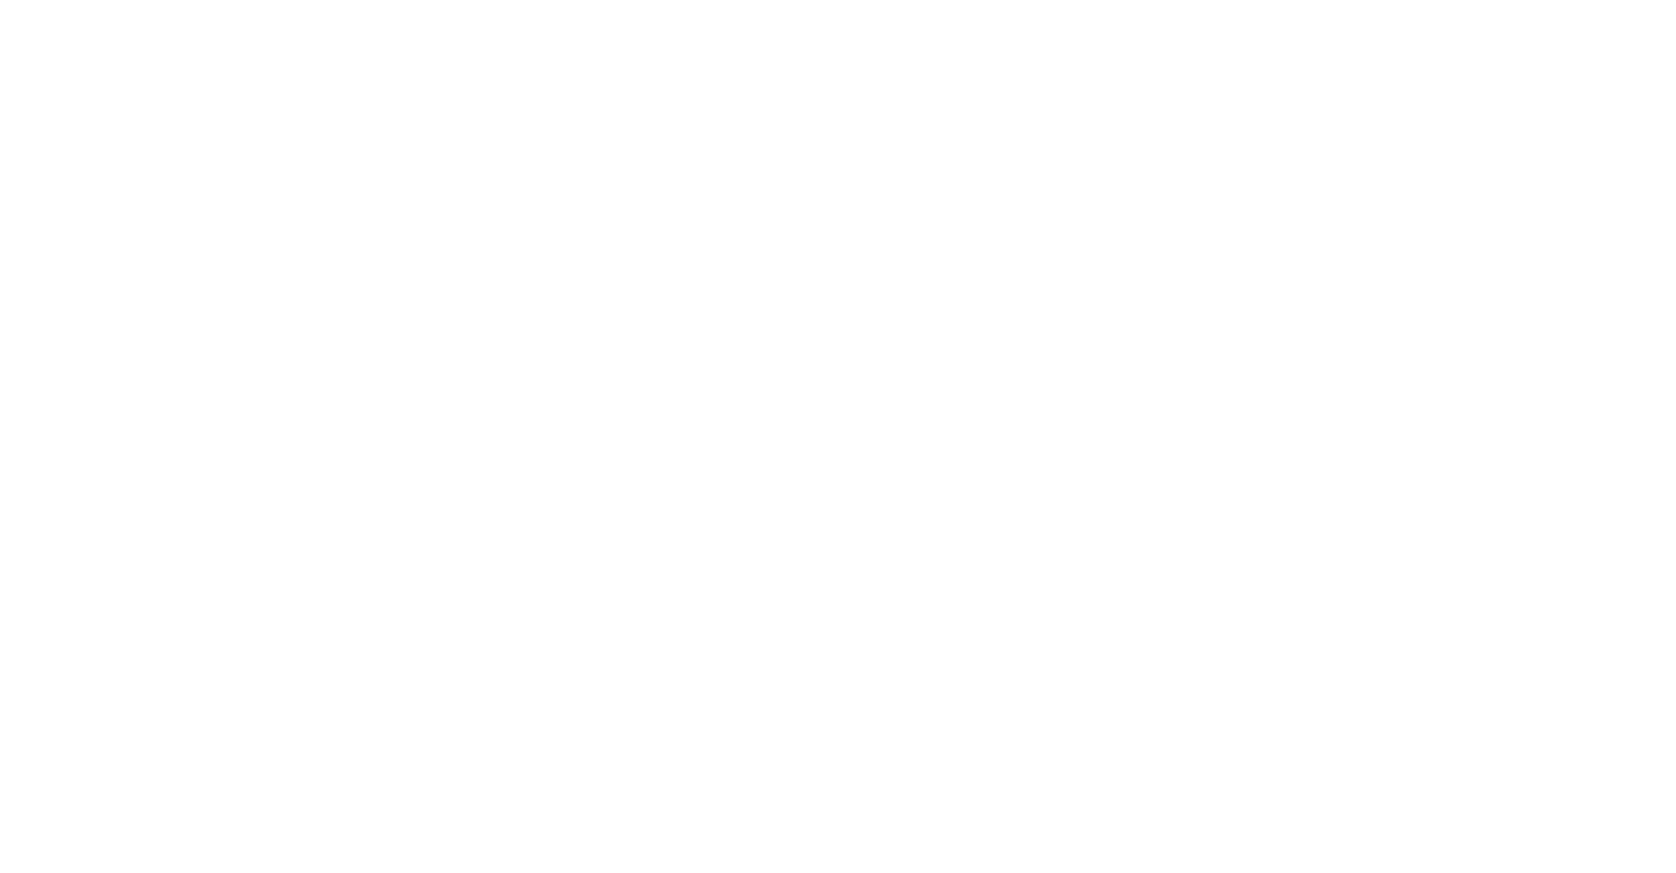 Wealth Defence Lawyers_Logo